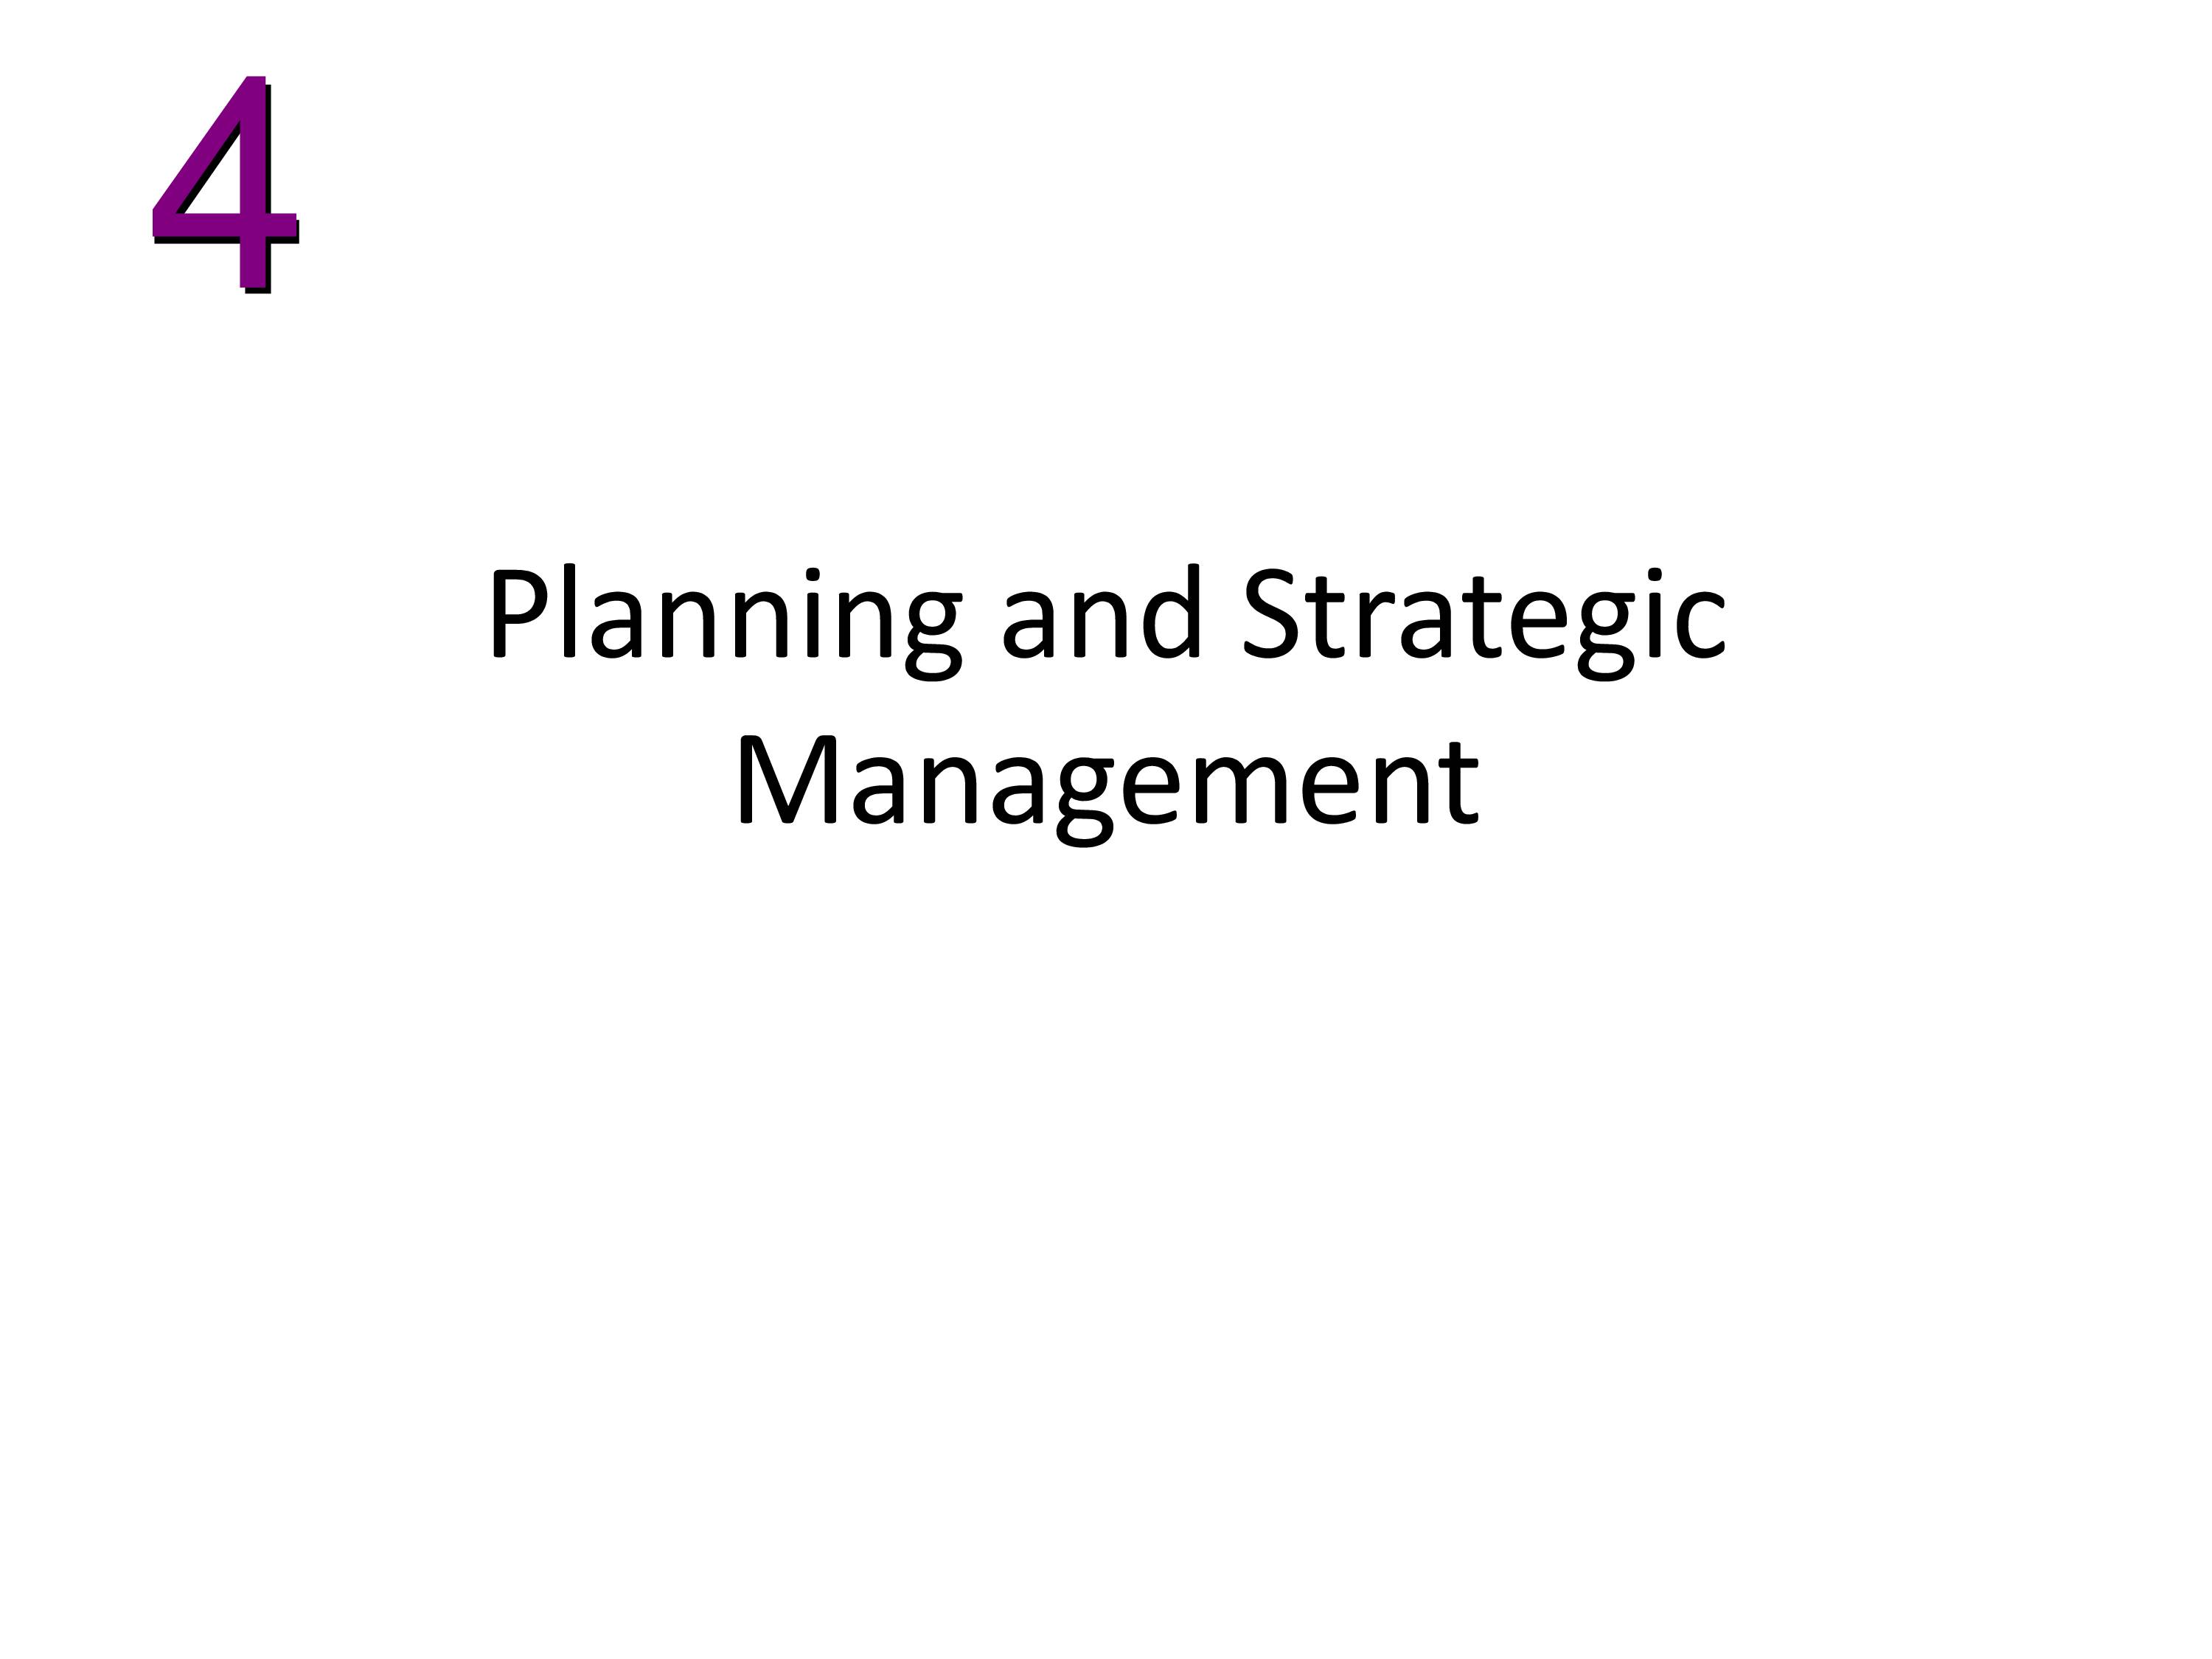 PPT on Planning and Decision Making